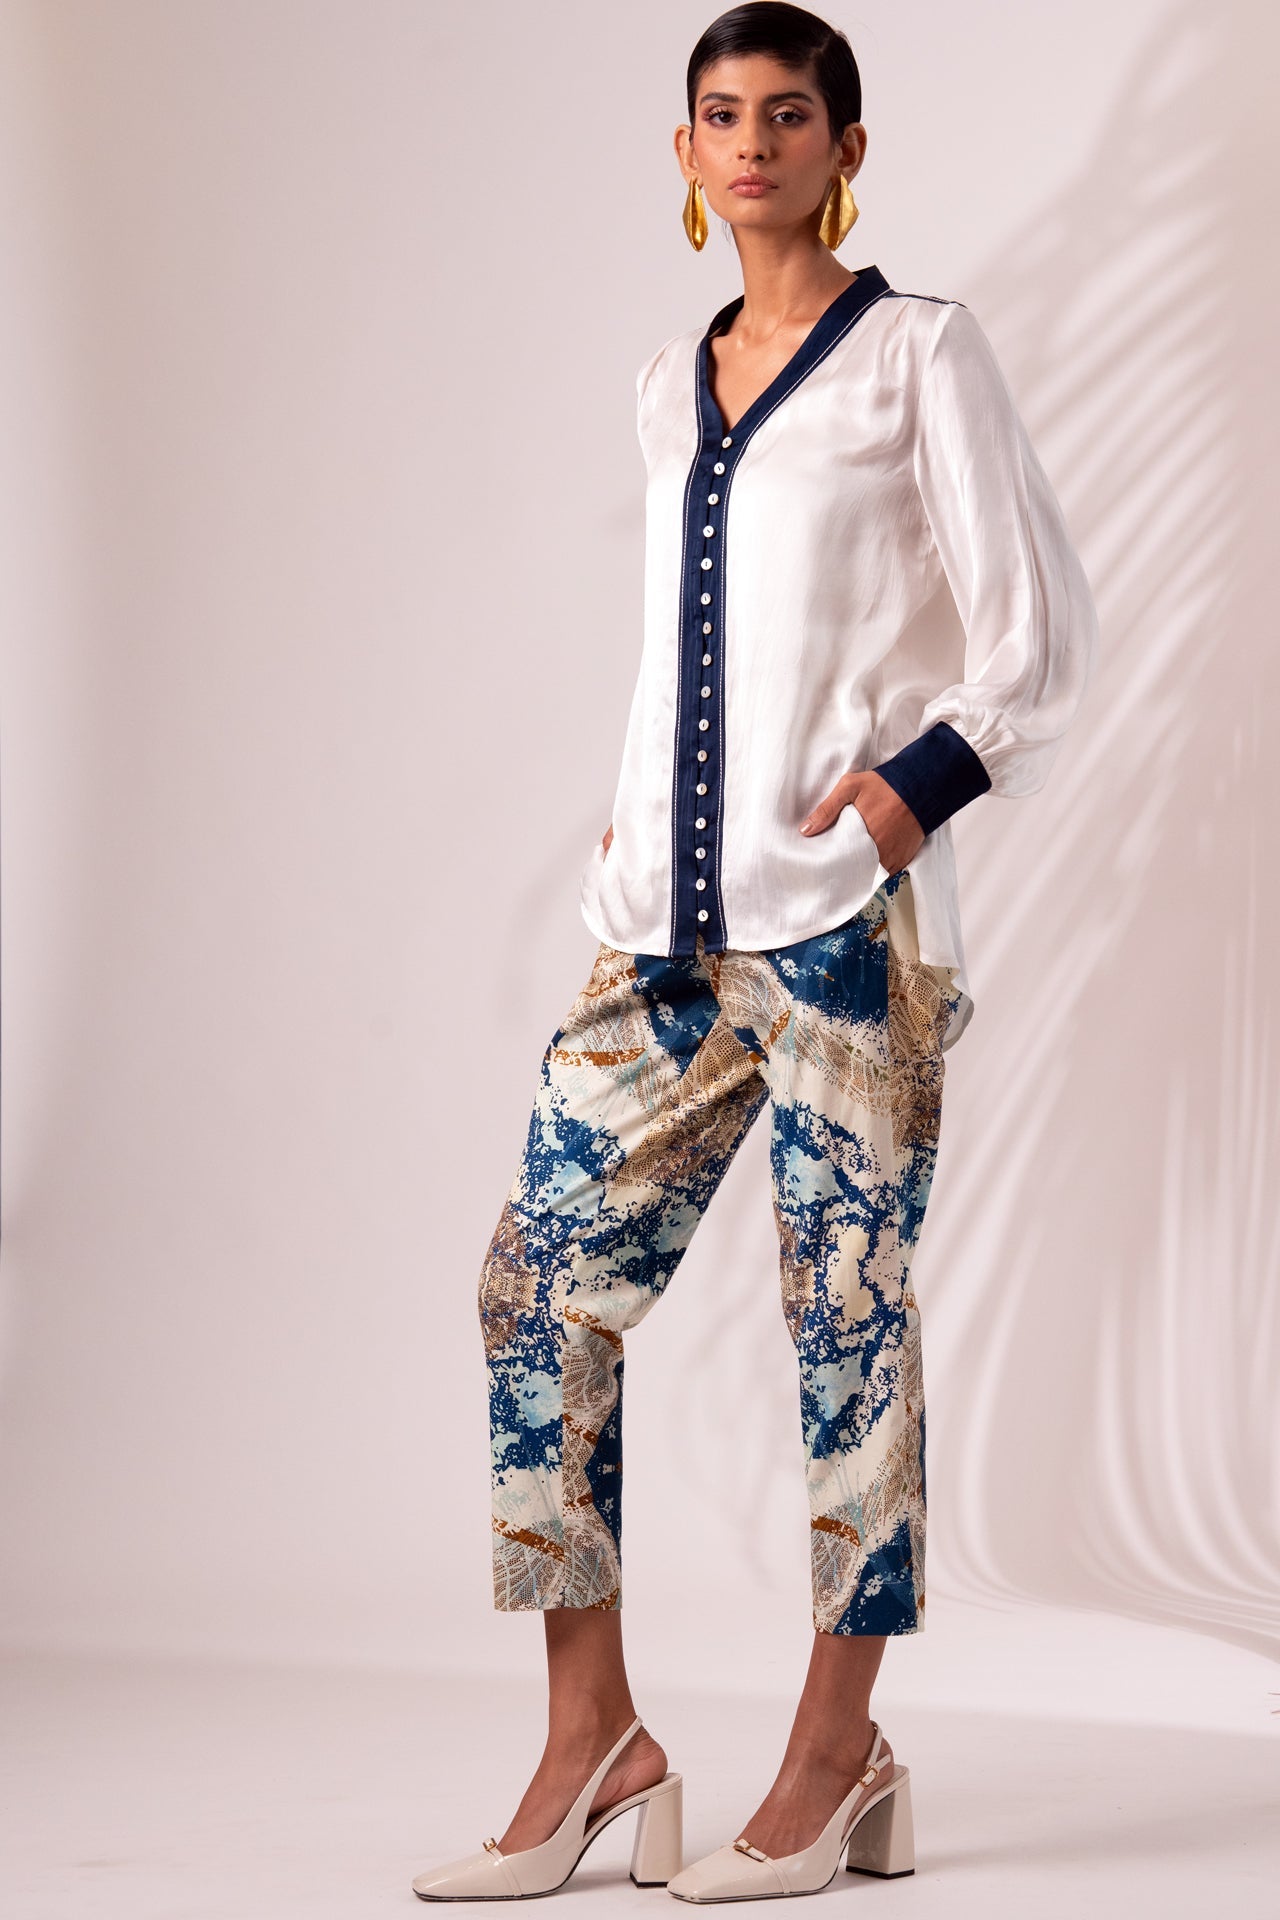 Benita - Back Cut-out Top + Printed Trousers - CiceroniCo-ord SetMadder Much